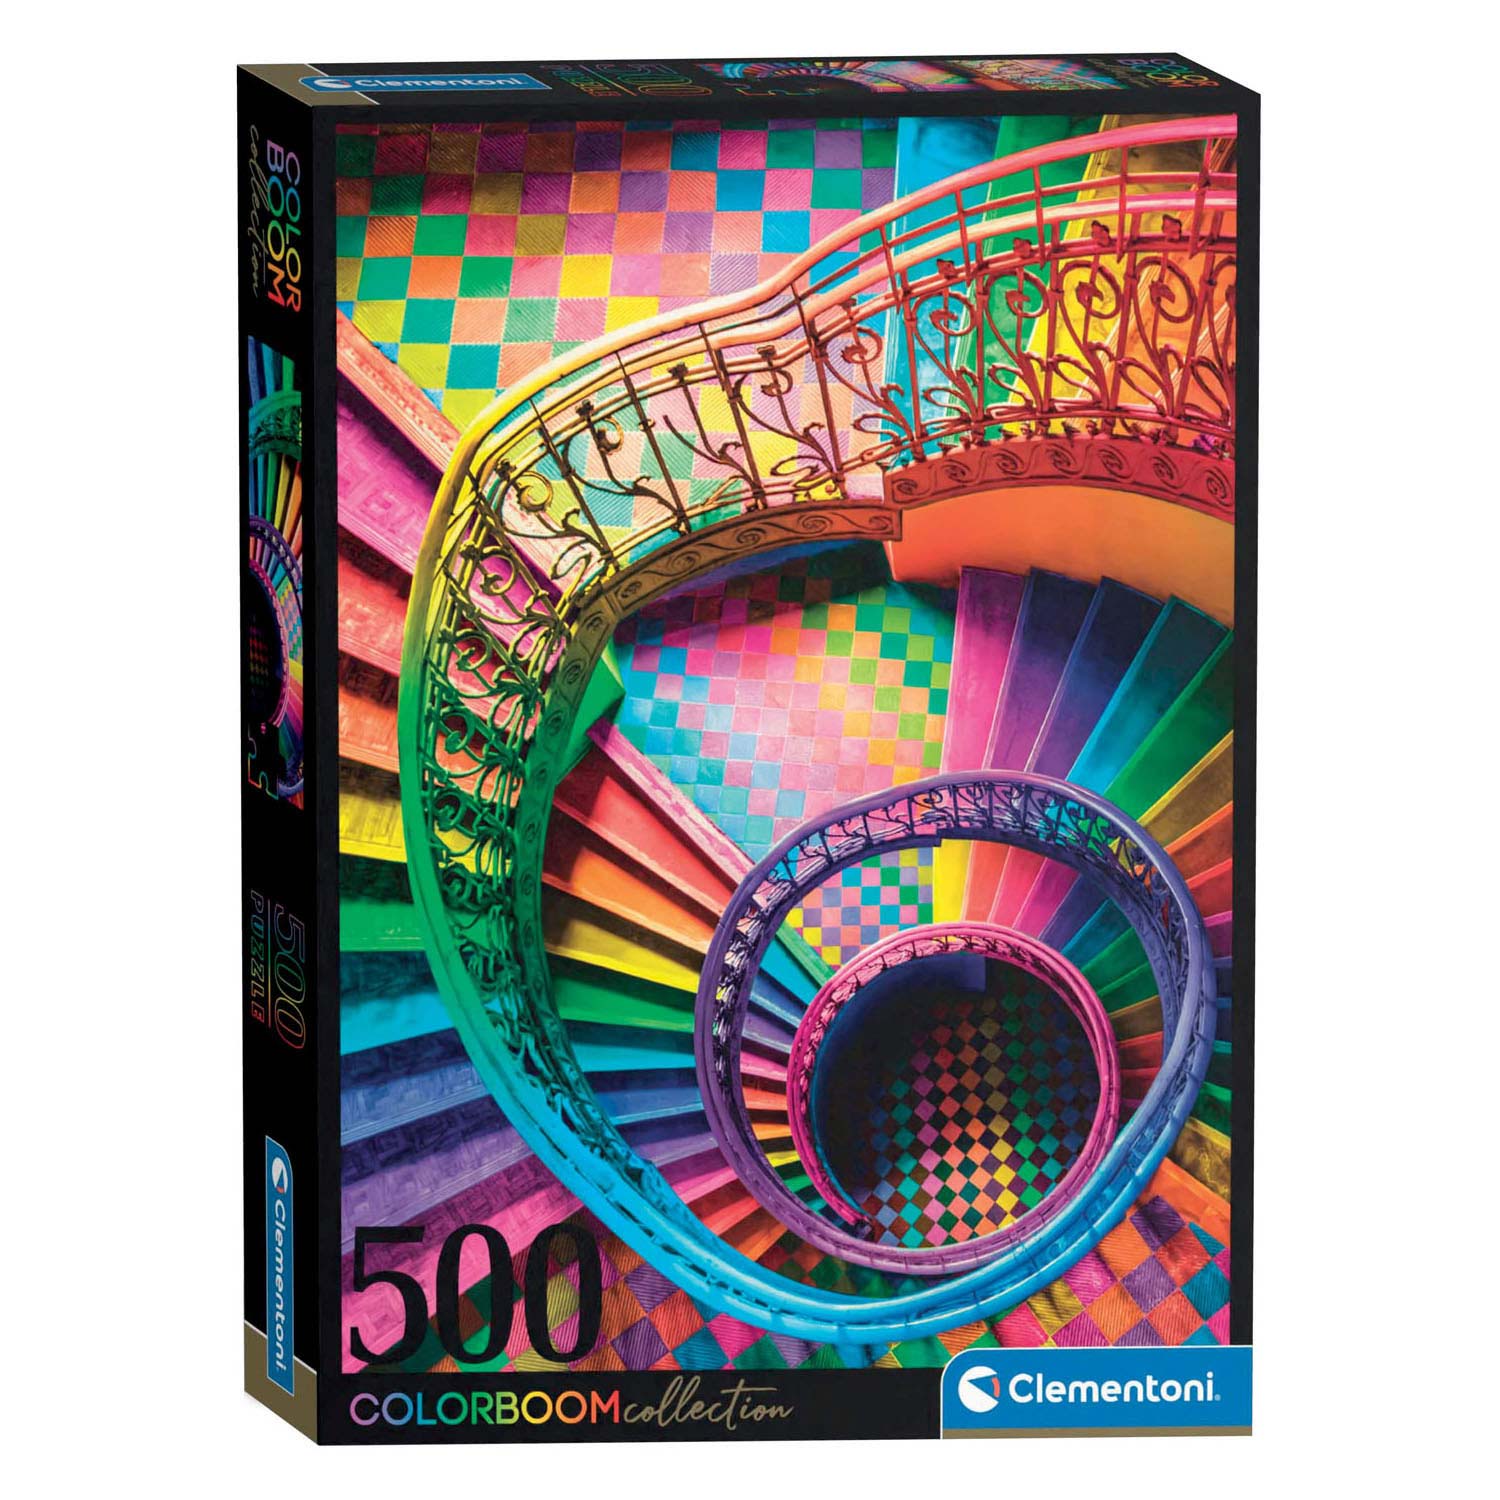 Clementoni Colorboom Legpuzzel Stairs